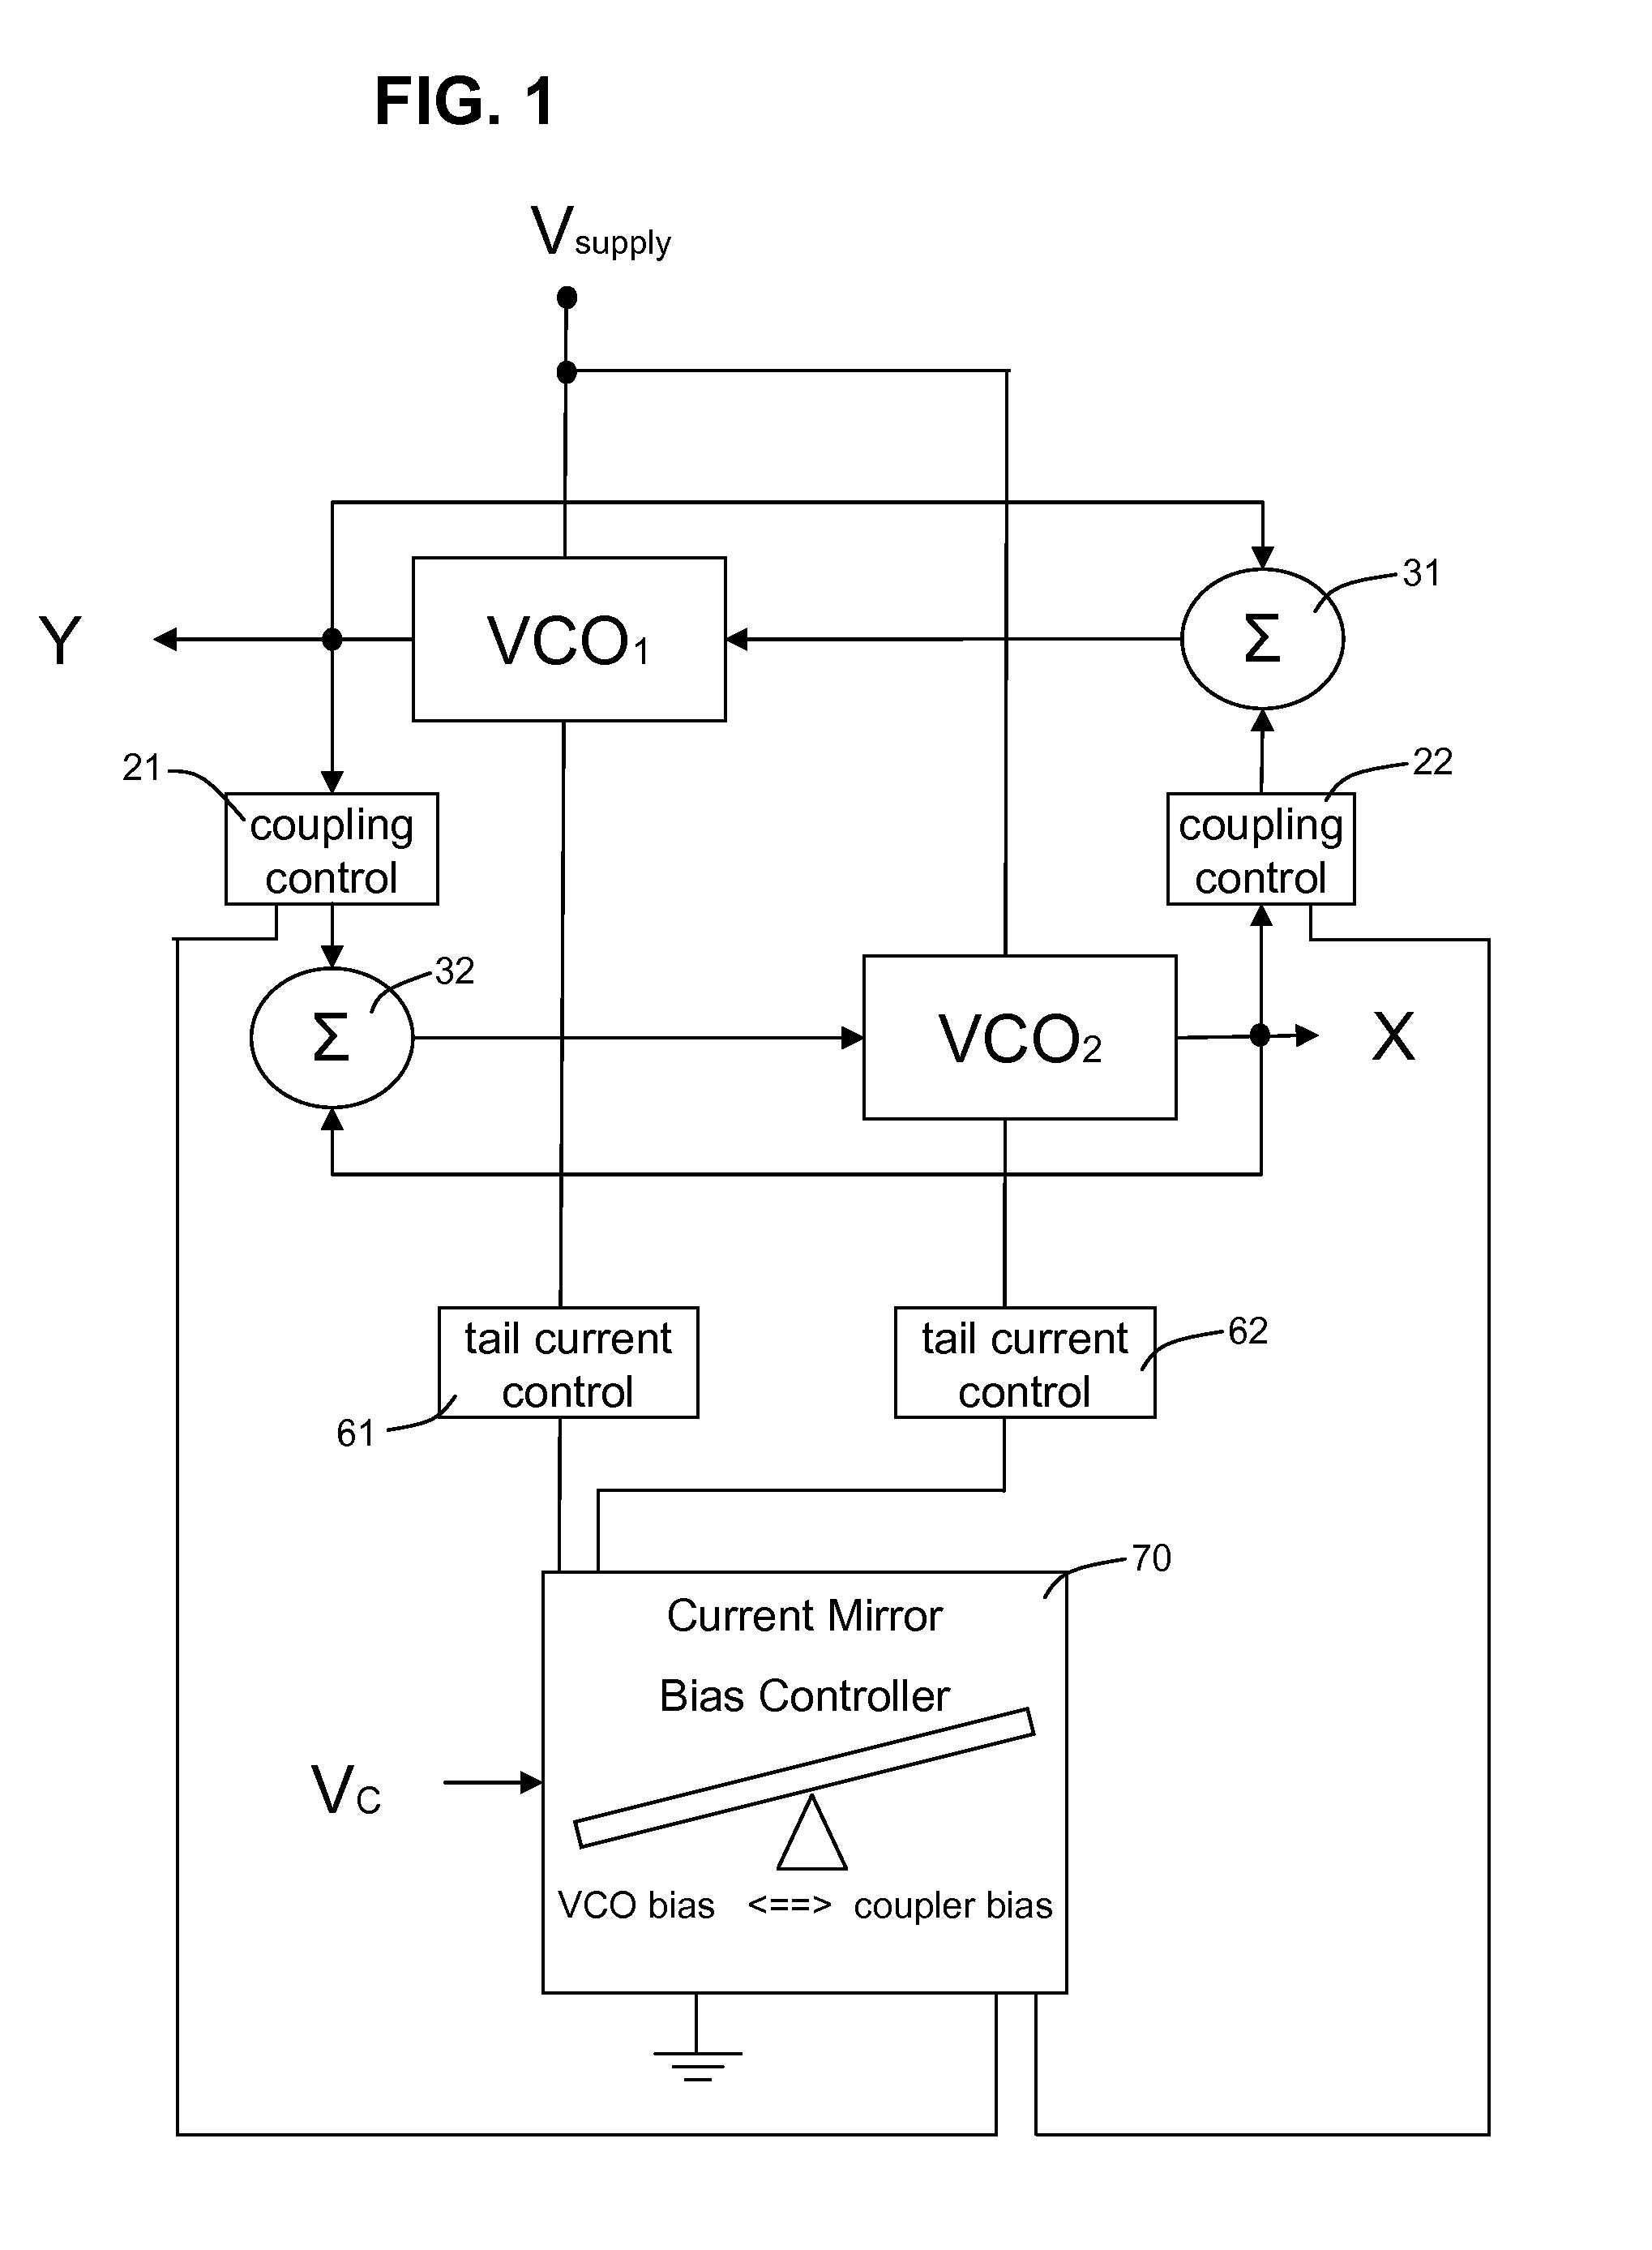 Quadrature LC voltage controlled oscillator with opposed bias and coupling control stages